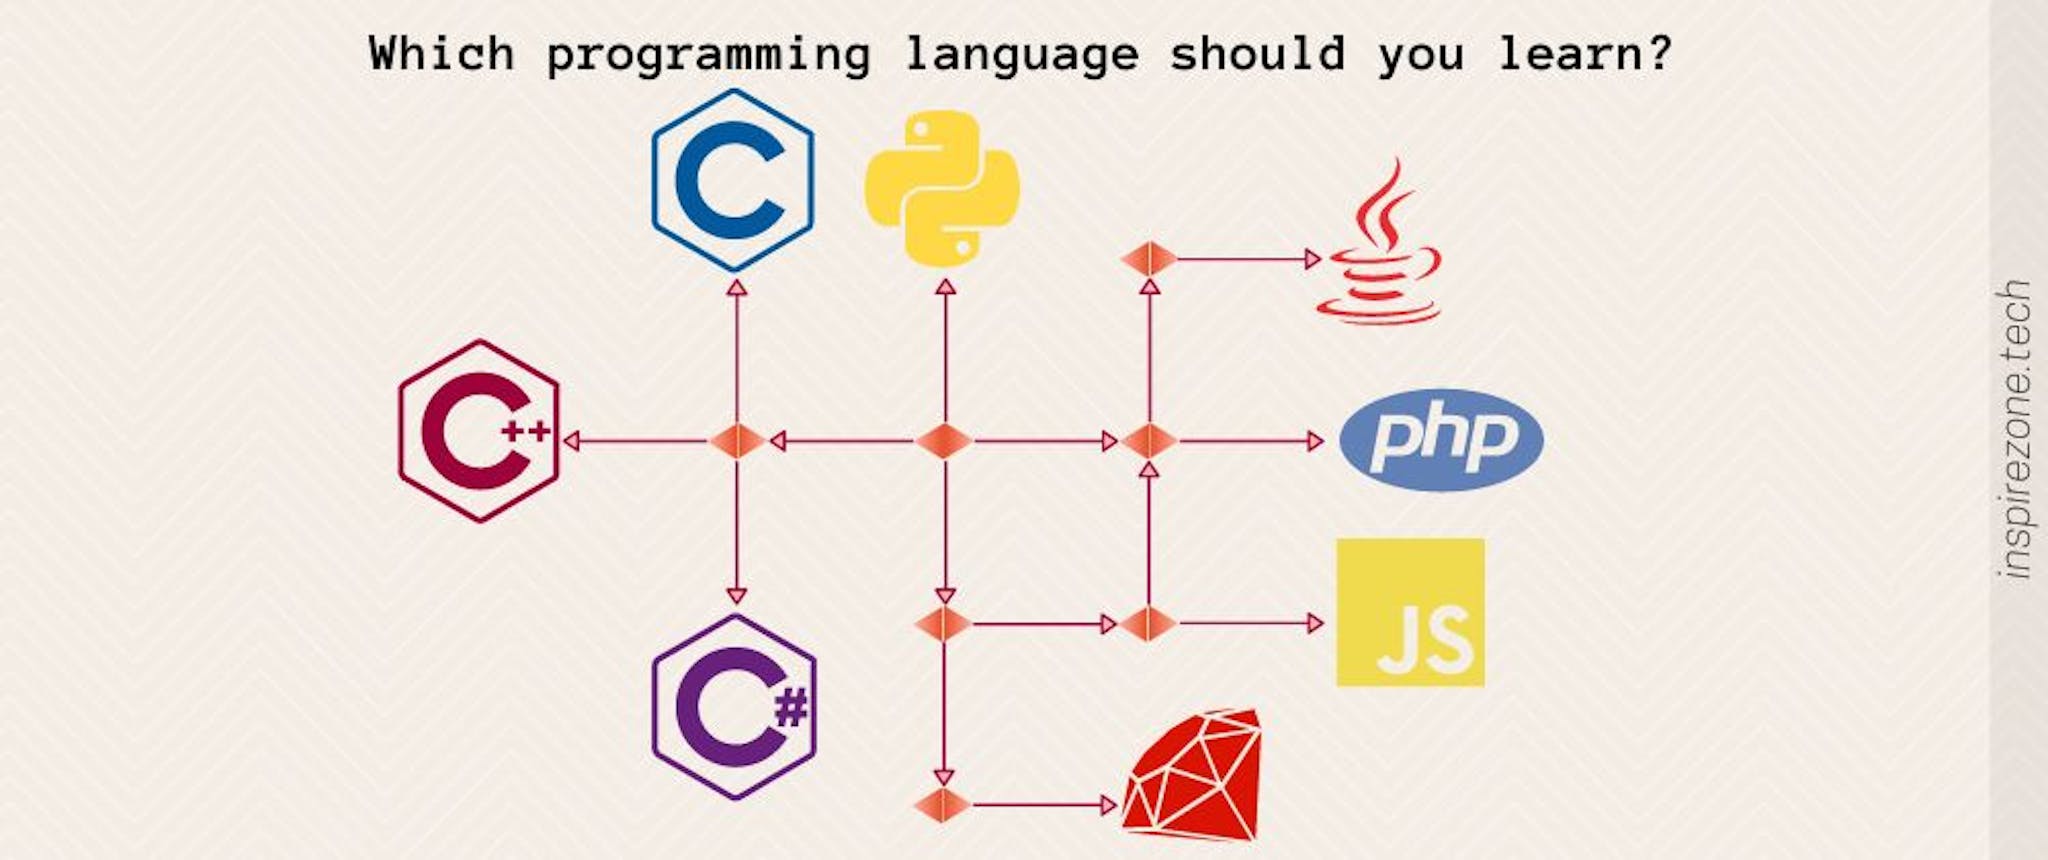 featured image - Deciding on a programming language to learn? Ask these 3 key questions